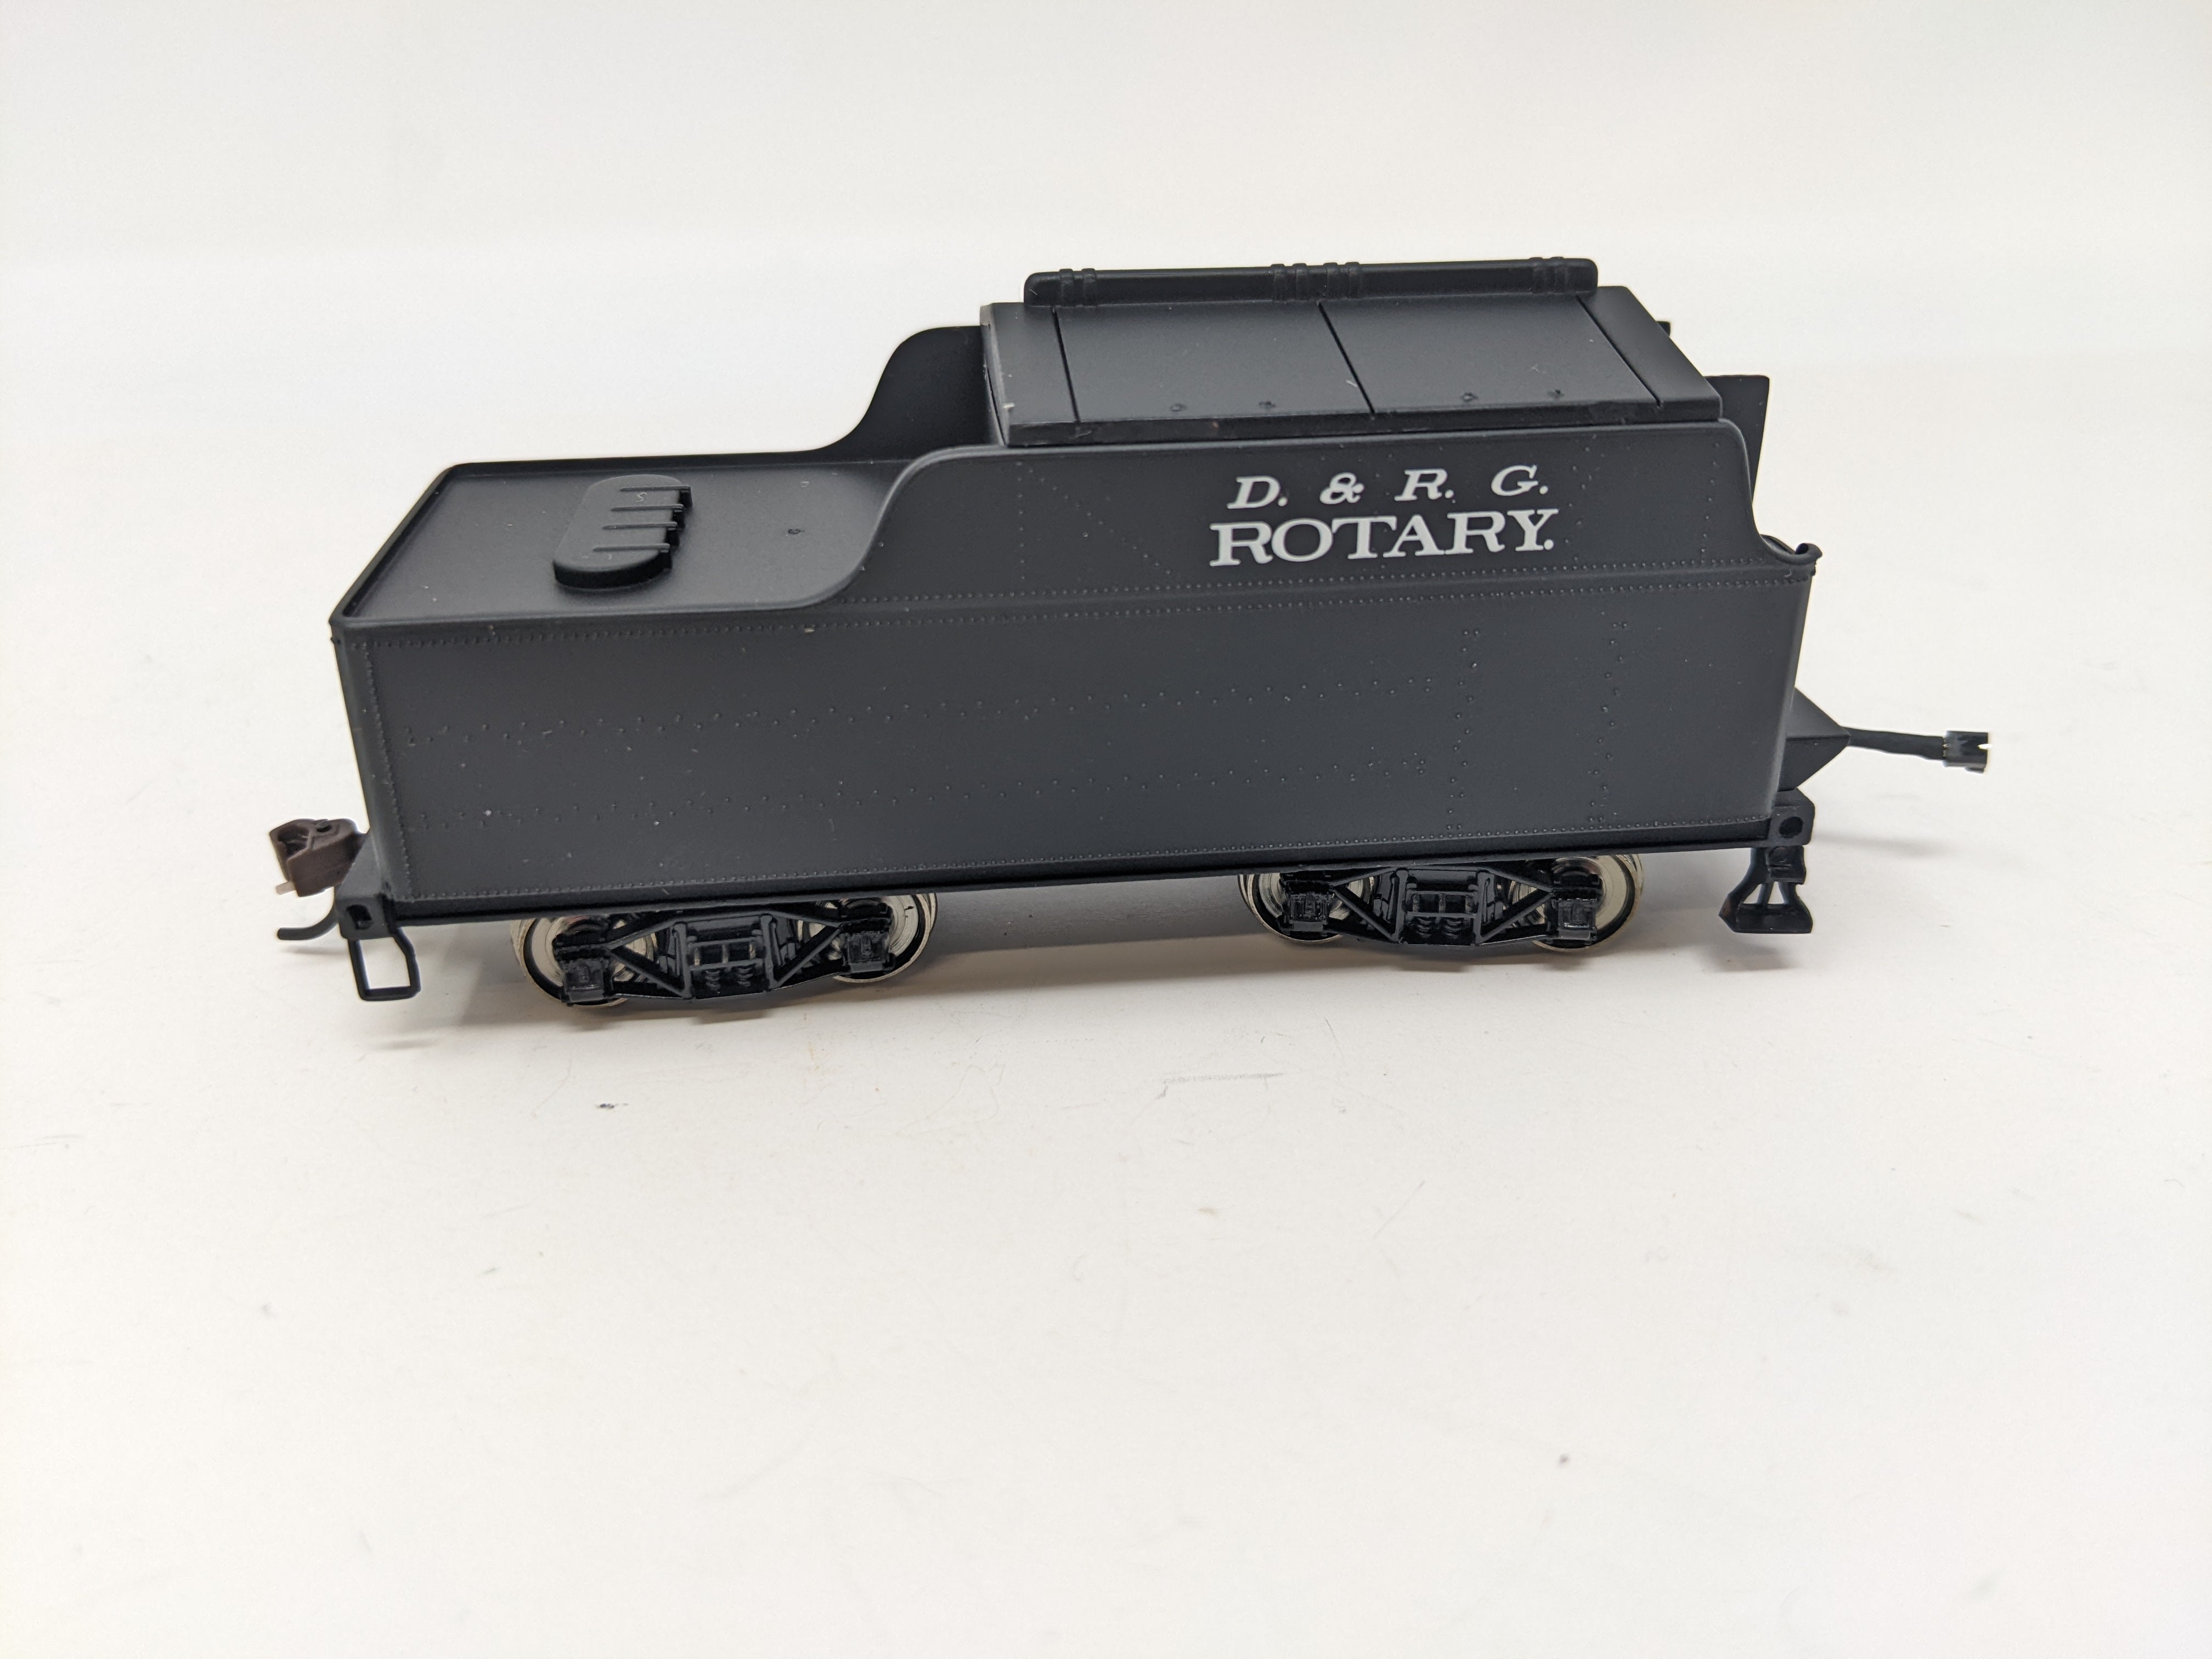 USED Walthers 932-1952 HO Scale, Alco Rotary Snow Plow, Denver and Rio Grande D&RG #071 (DC)